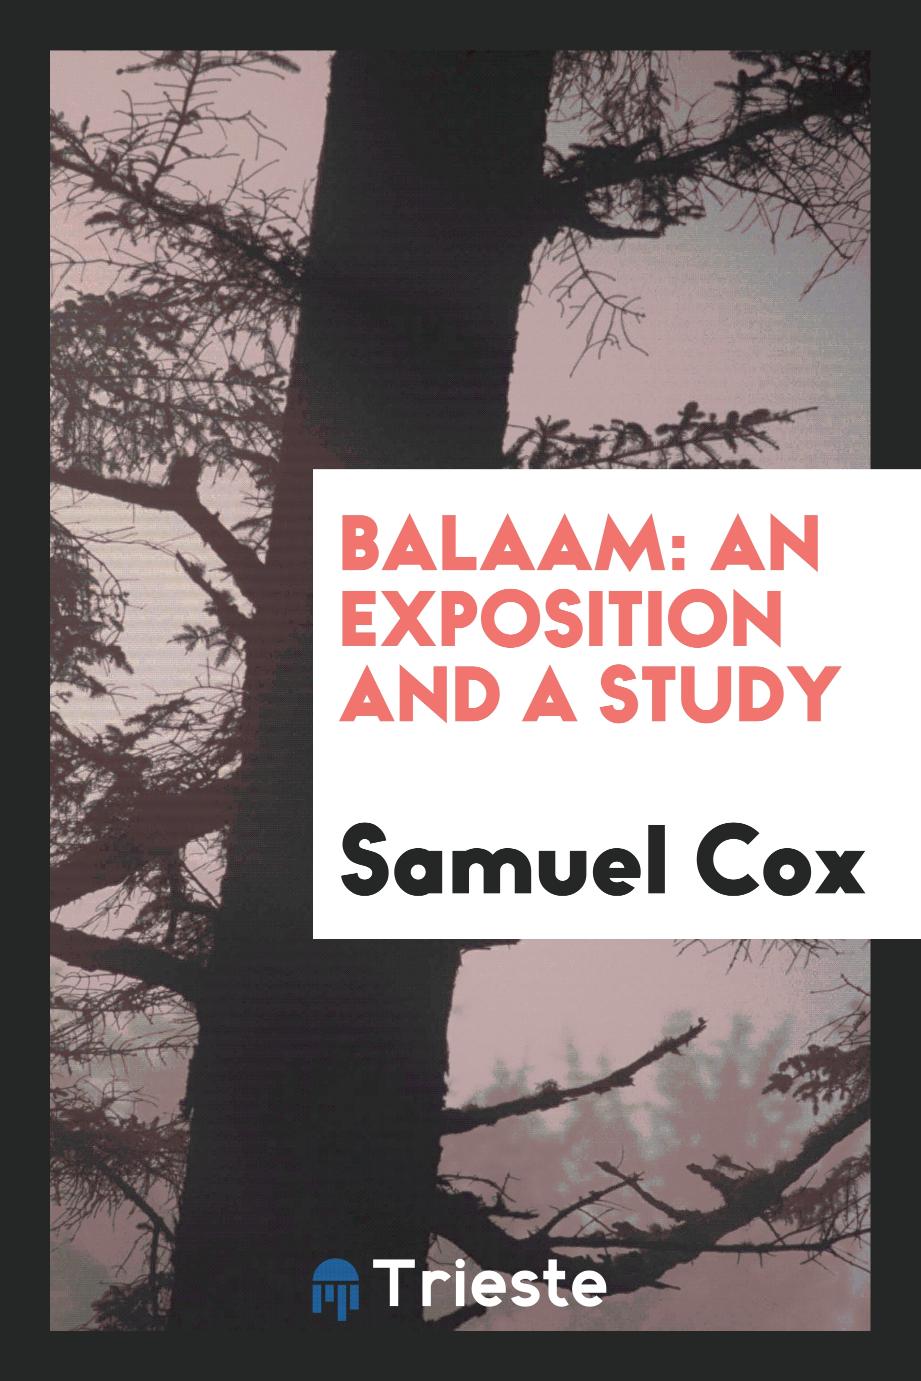 Balaam: an exposition and a study